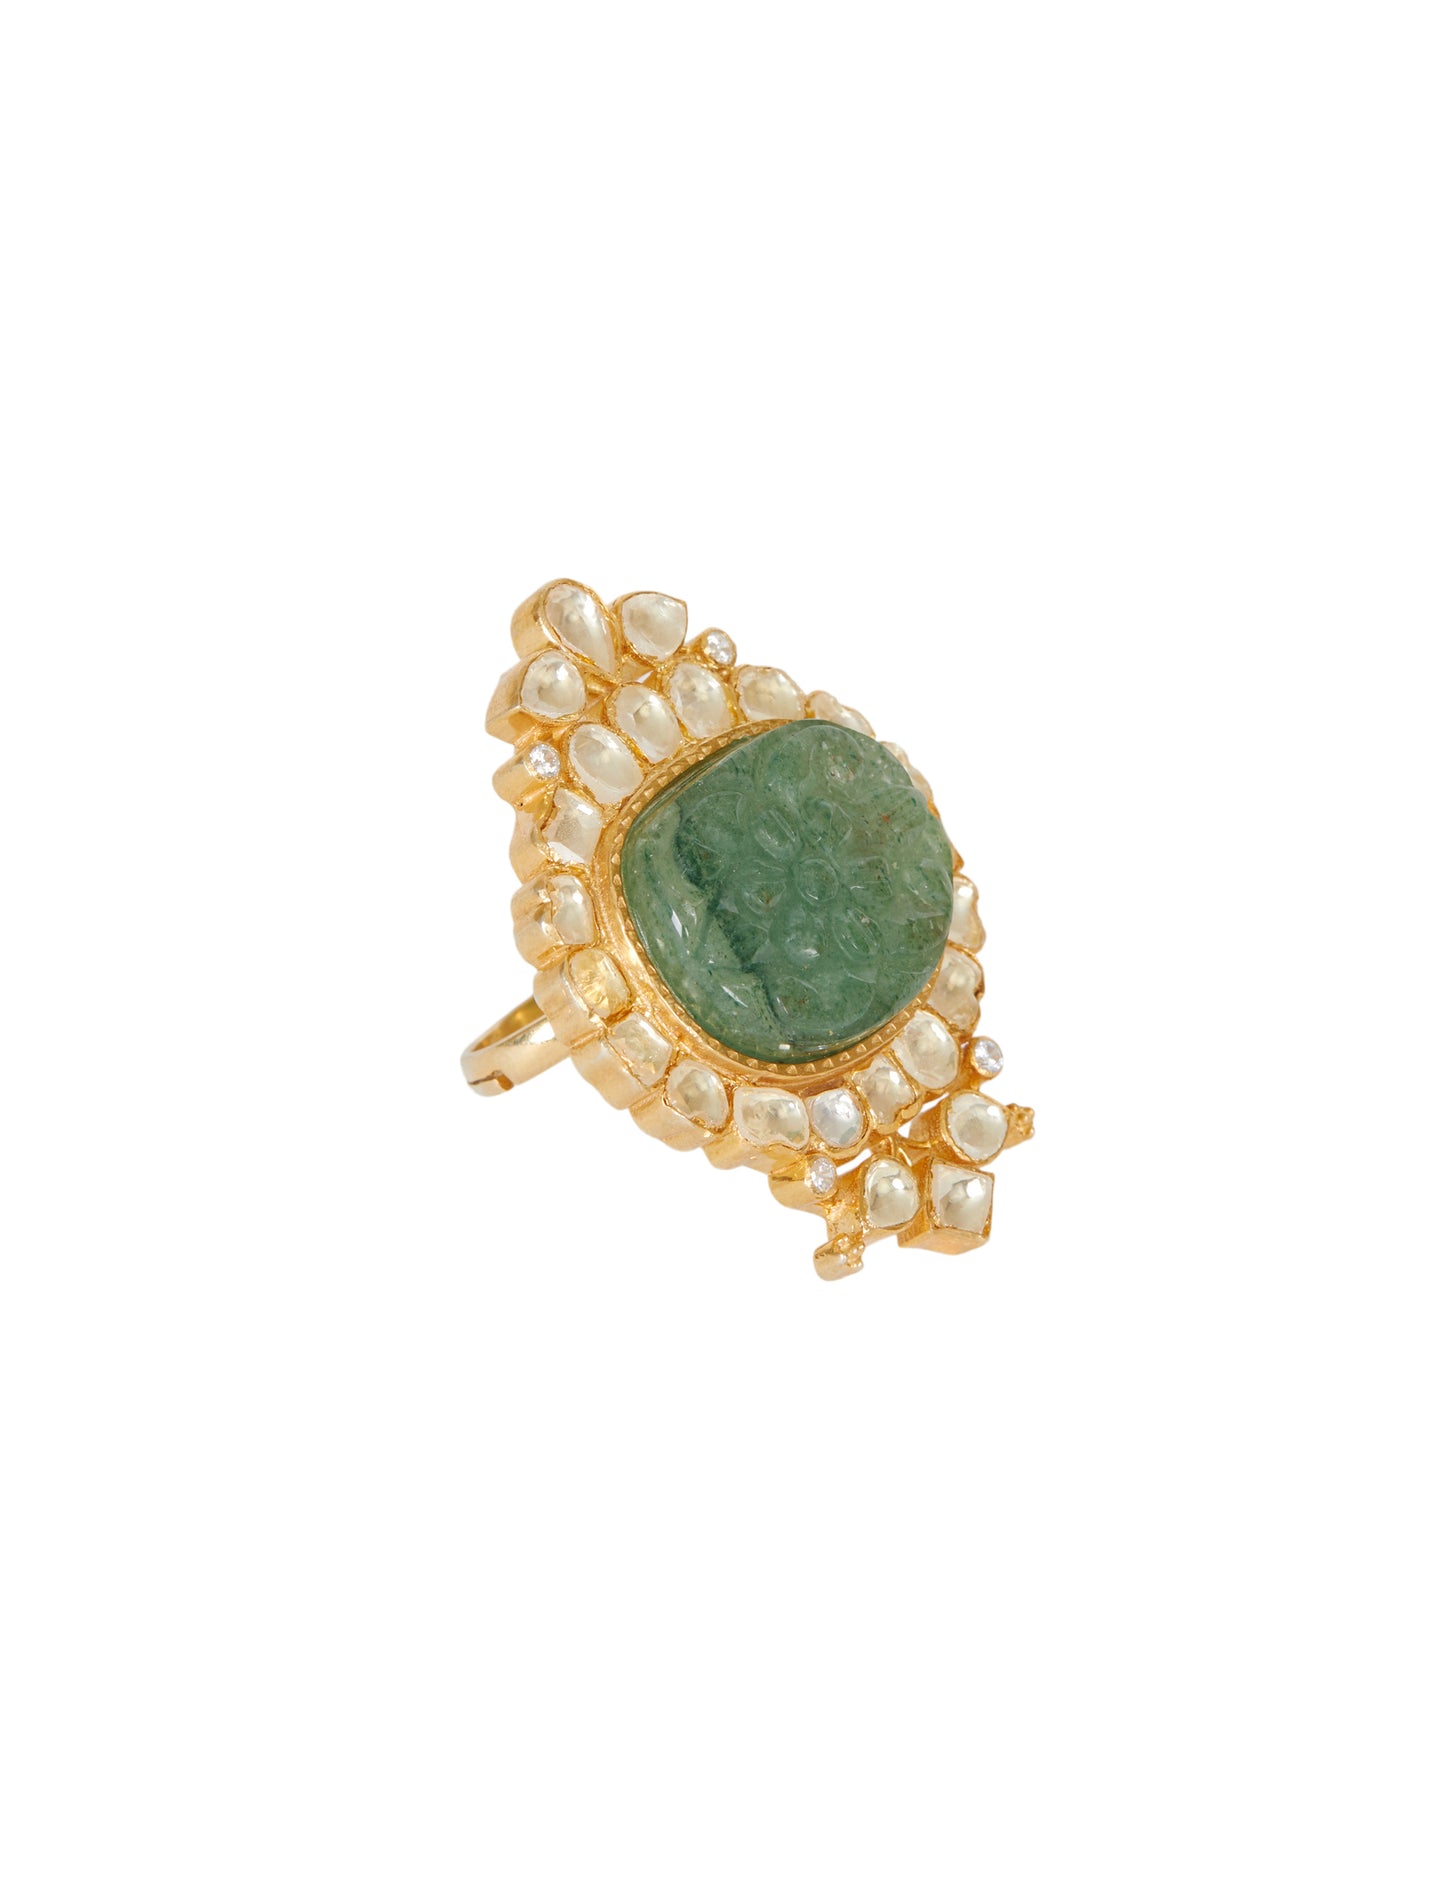 Vellore Polki Ring with Green Carved Stone set in 92.5 Silver  by kaari